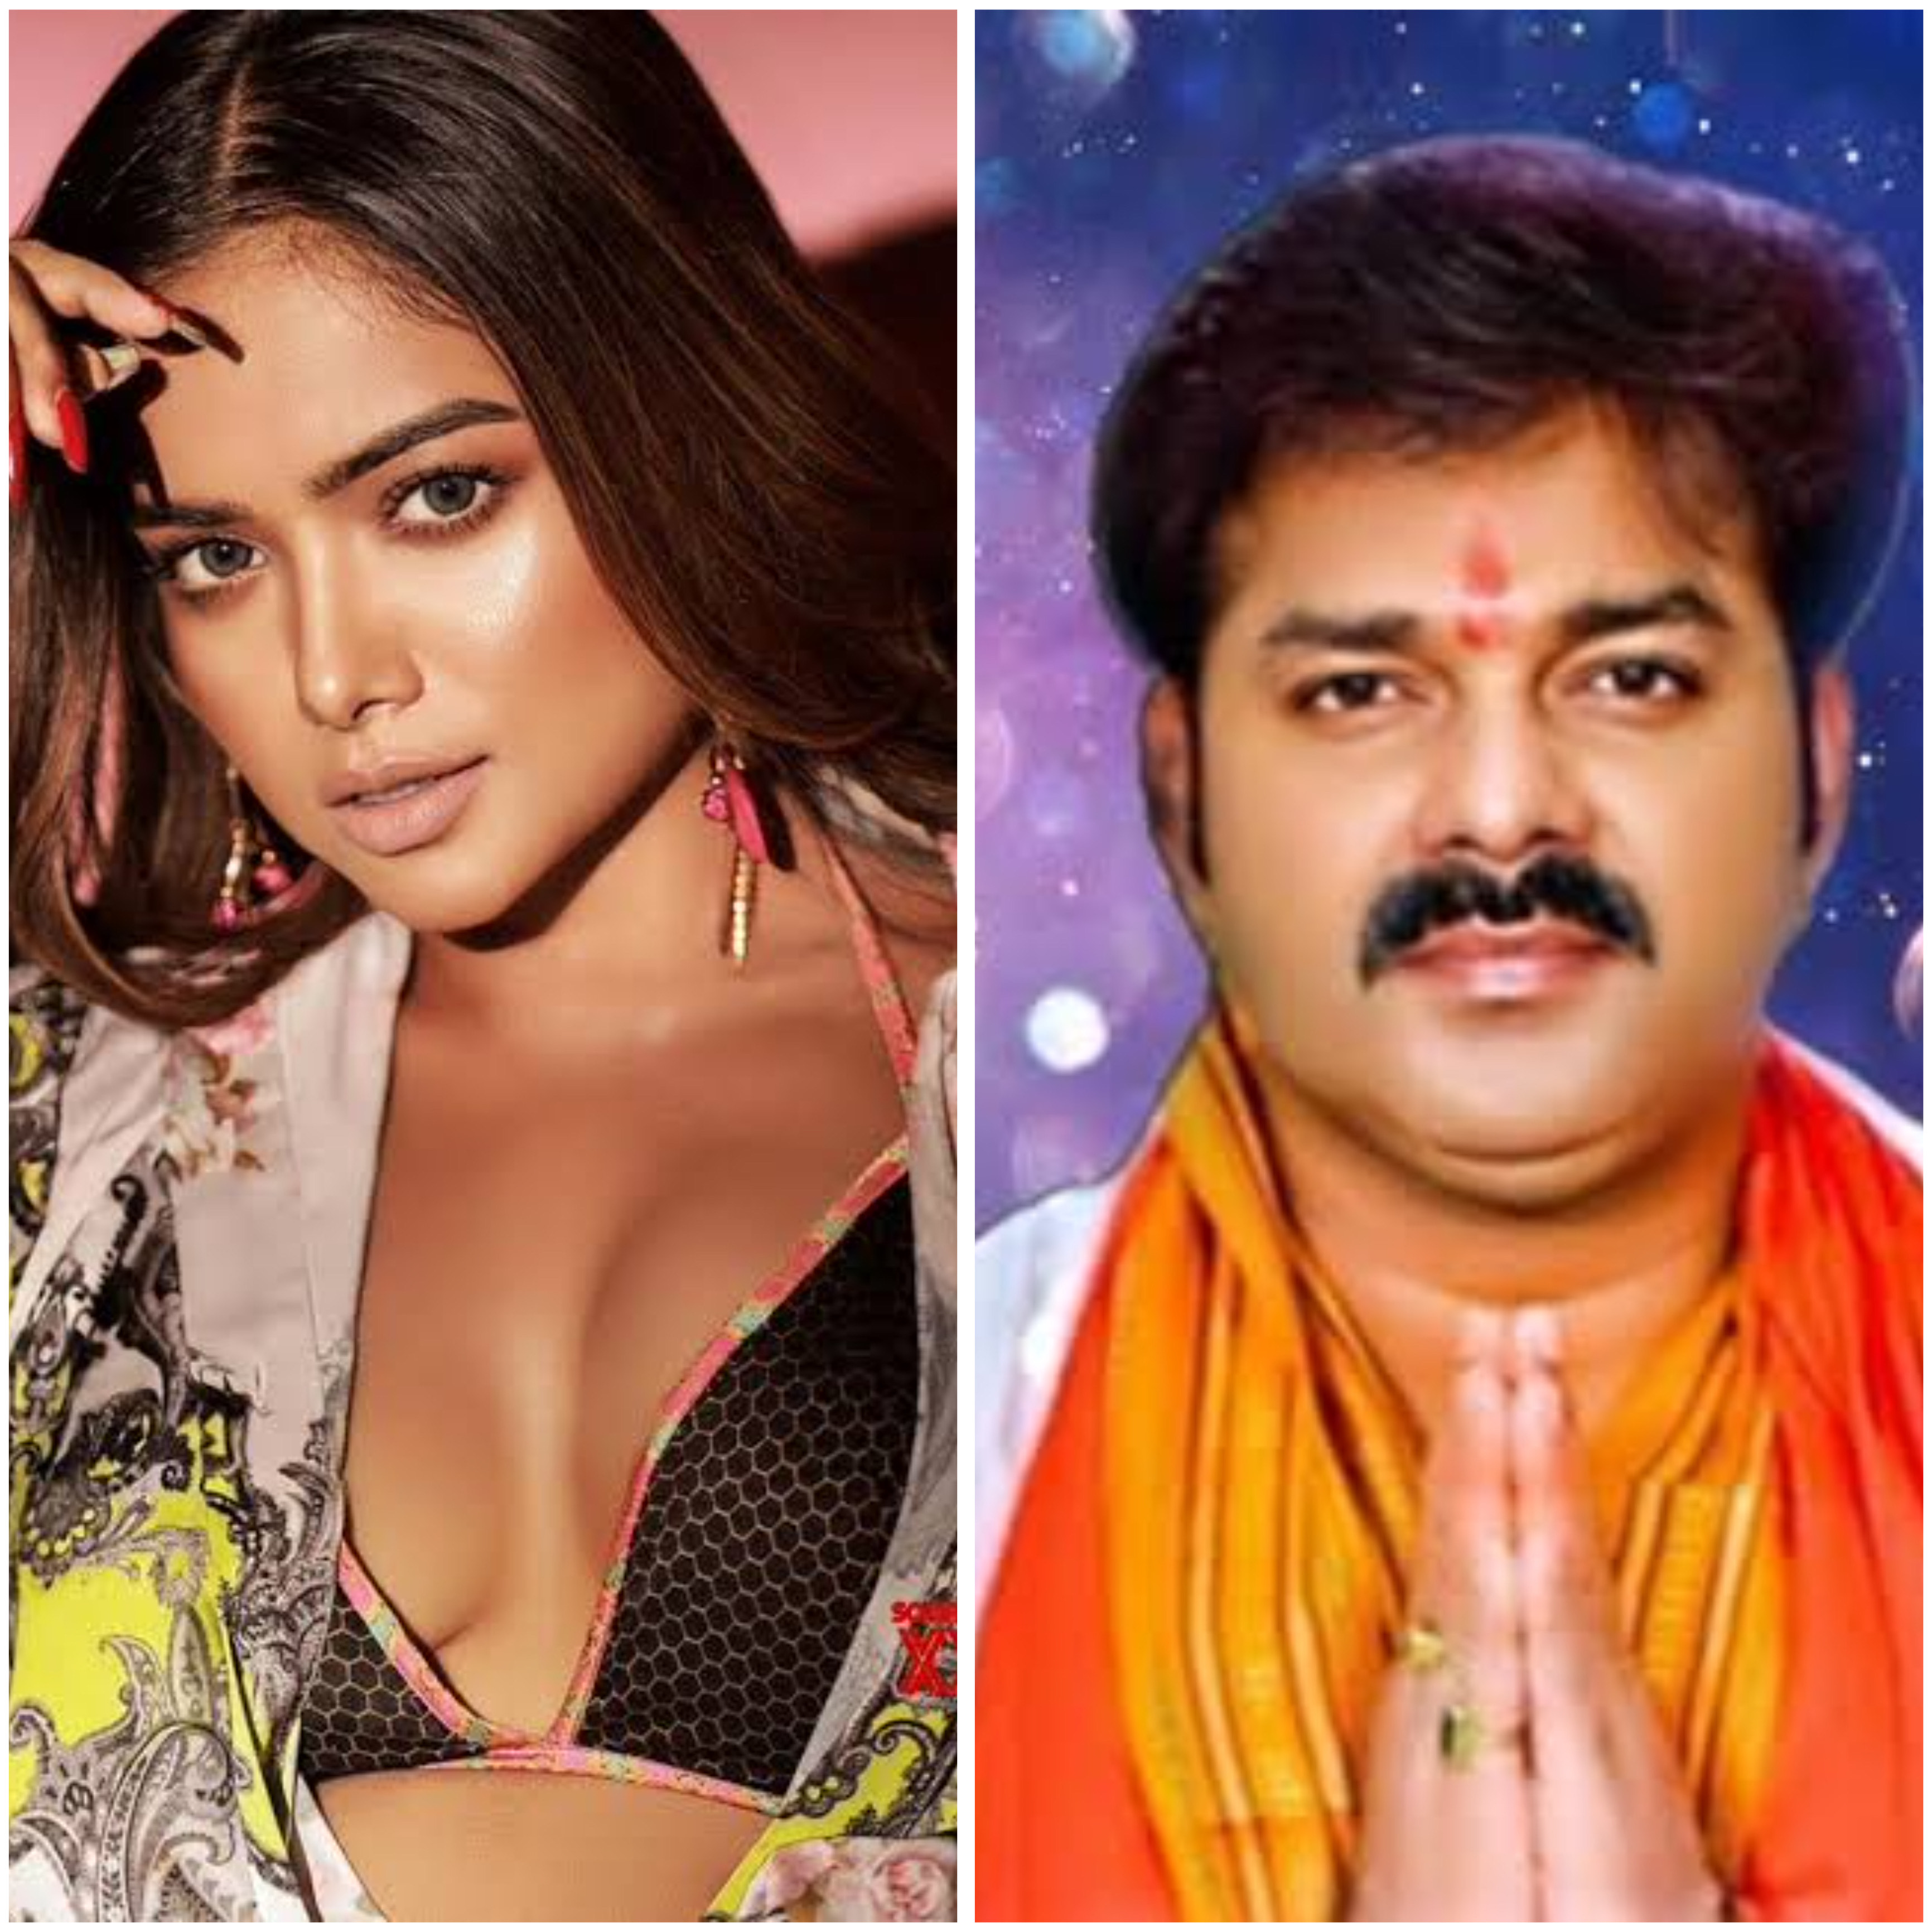 Manisha Rani Supports Pawan Singh and Urges Fans to Vote for him as he enters politics